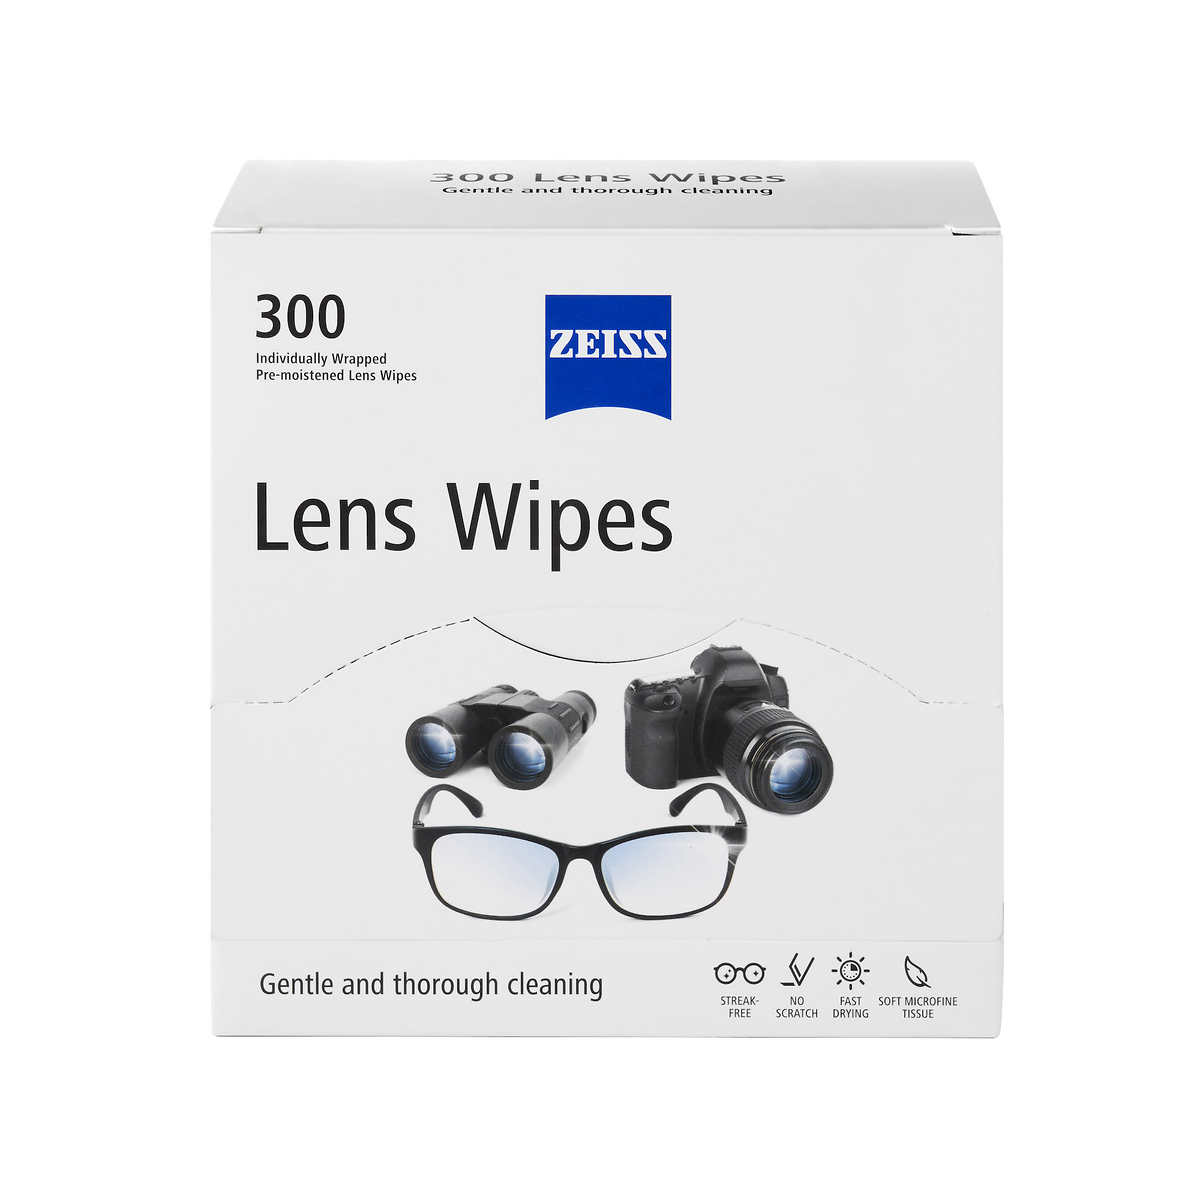 Metene Lens Wipes, Pre-Moistened Eye Glass Cleaner Wipes, 100 Count, Size: Large